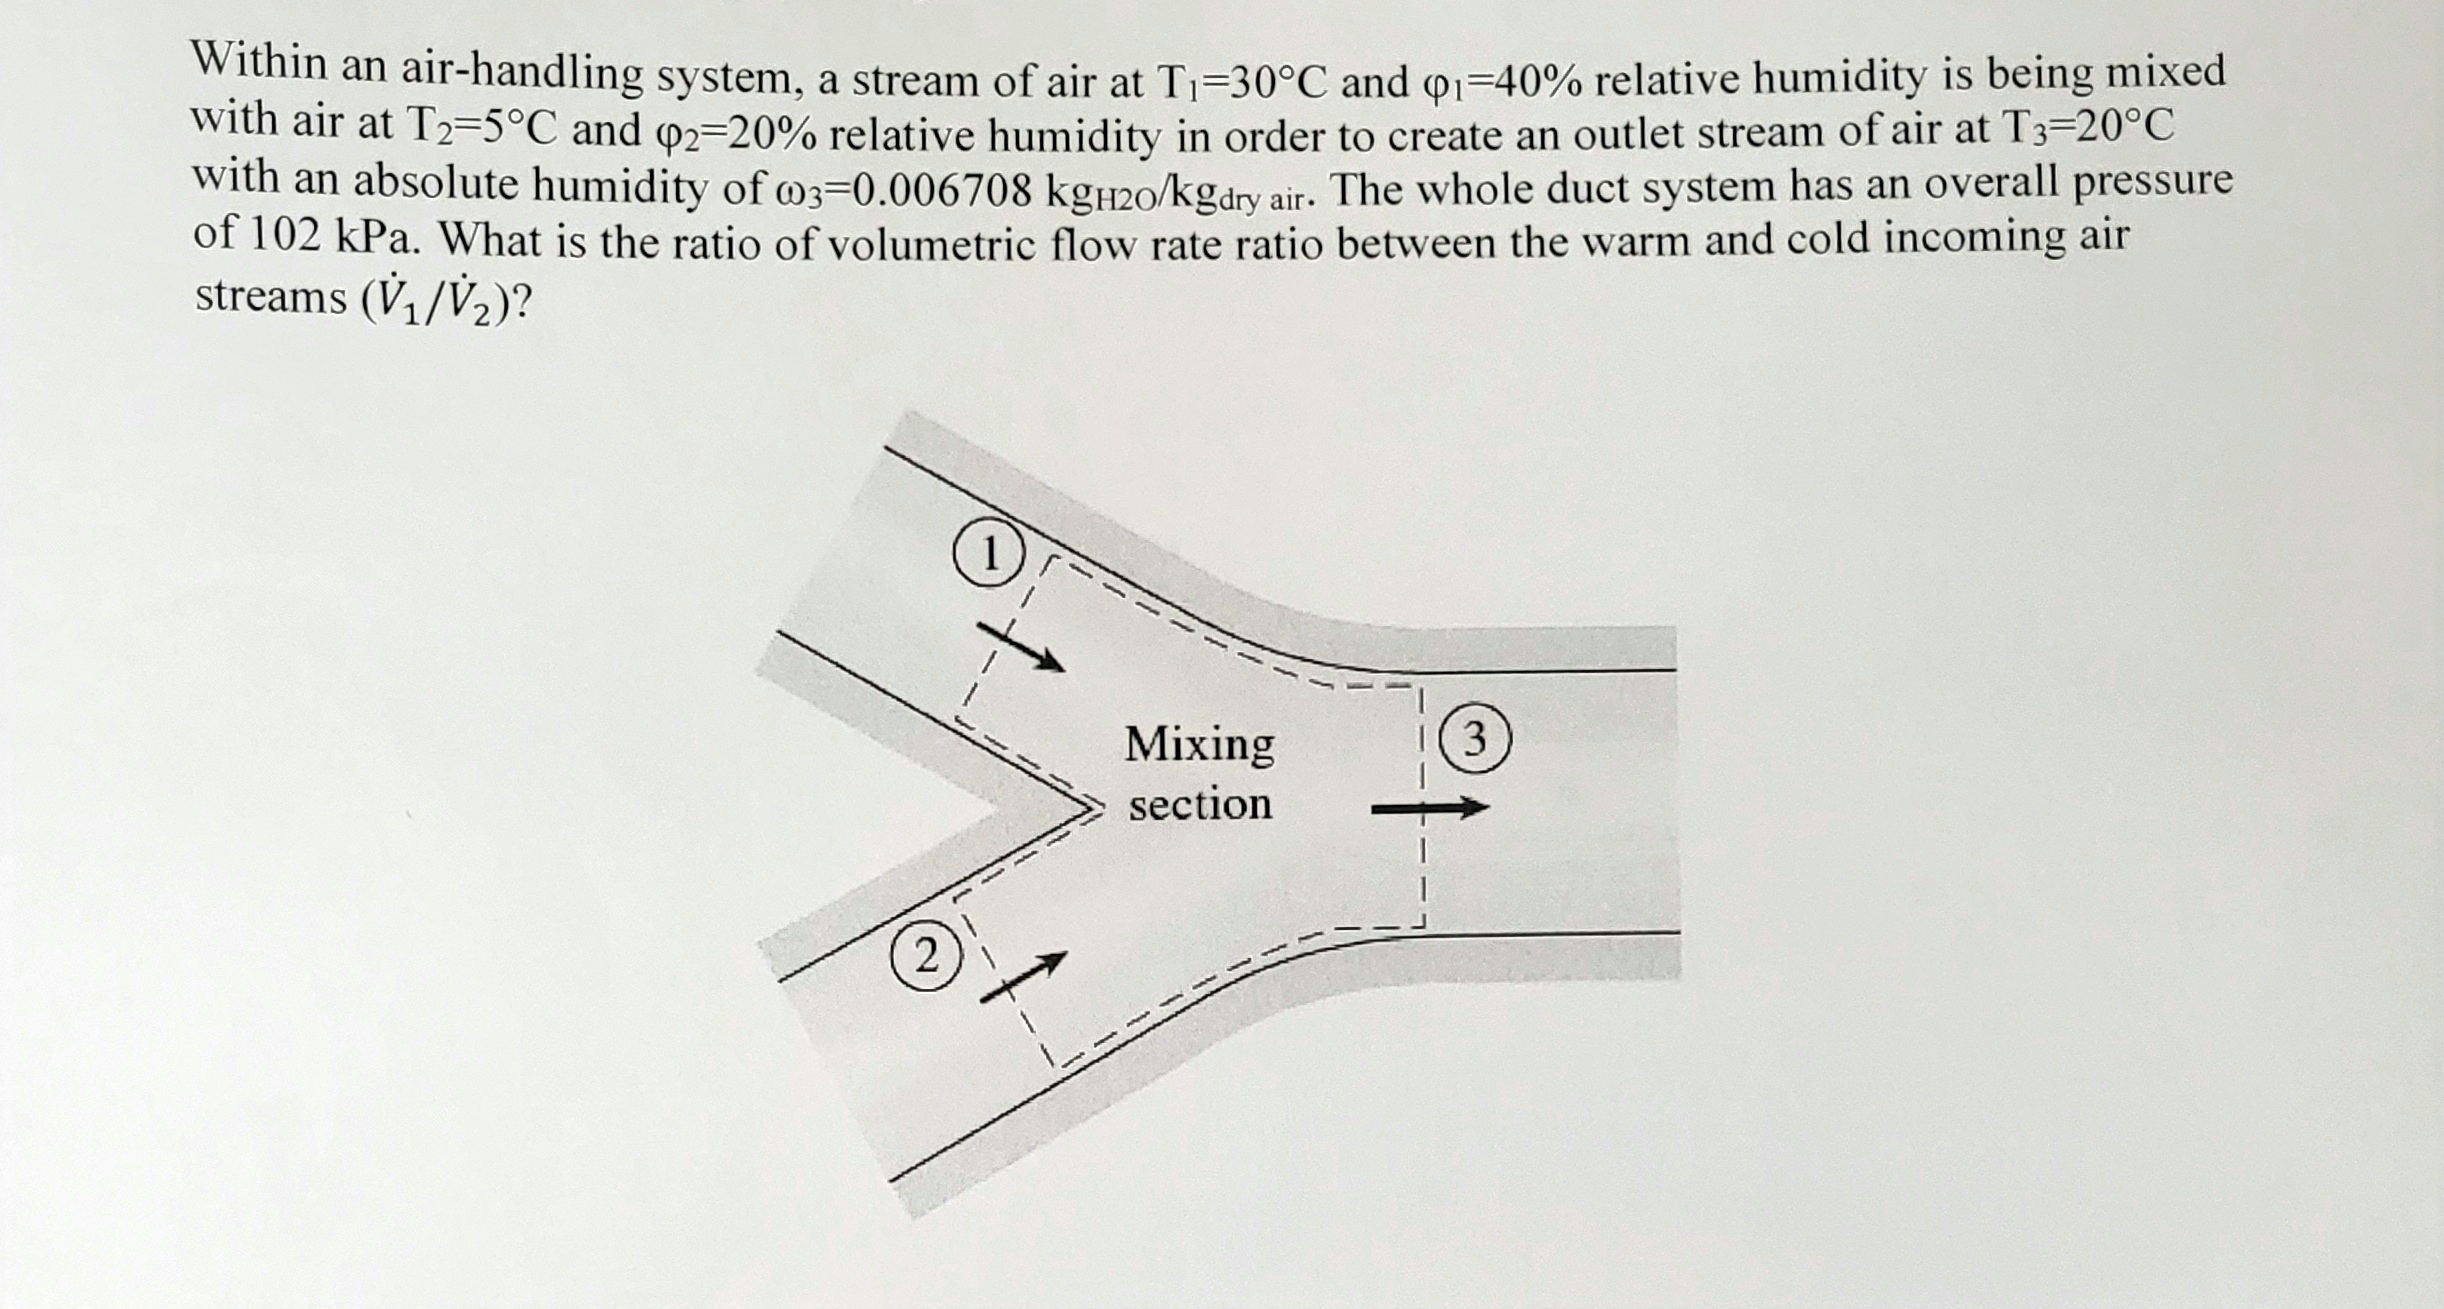 Within an air-handling system, a stream of air at T=30°C and 91=40% relative humidity is being mixed
with air at T2=5°C and 92=20% relative humidity in order to create an outlet stream of air at T3-20°C
with an absolute humidity of w3=0.006708 kg120/kgdry air. The whole duct system has an overall pressure
of 102 kPa. What is the ratio of volumetric flow rate ratio between the warm and cold incoming air
streams (V,/V2)?
1.
Mixing
3
section
2
